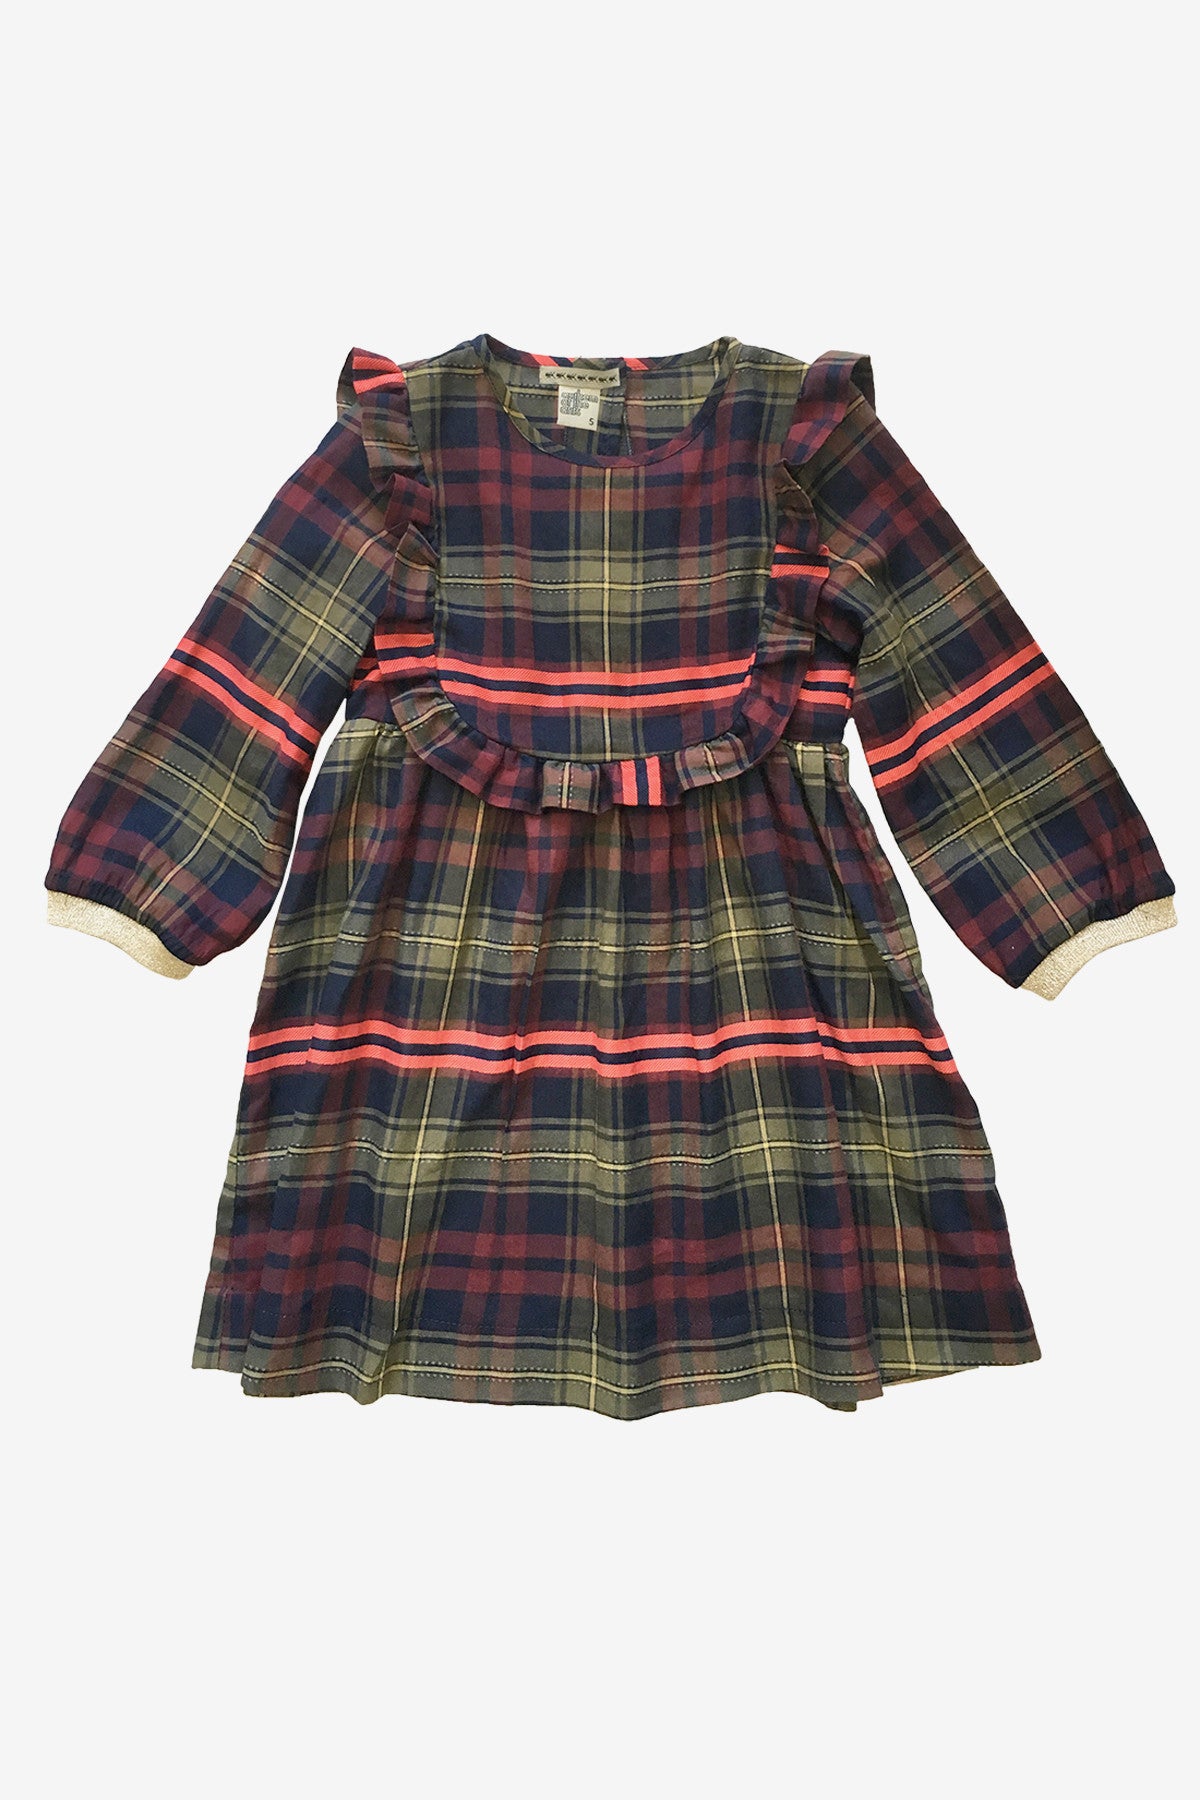 Girls Dresses by Boutique, Modern and Designer Kids Clothes Brands ...